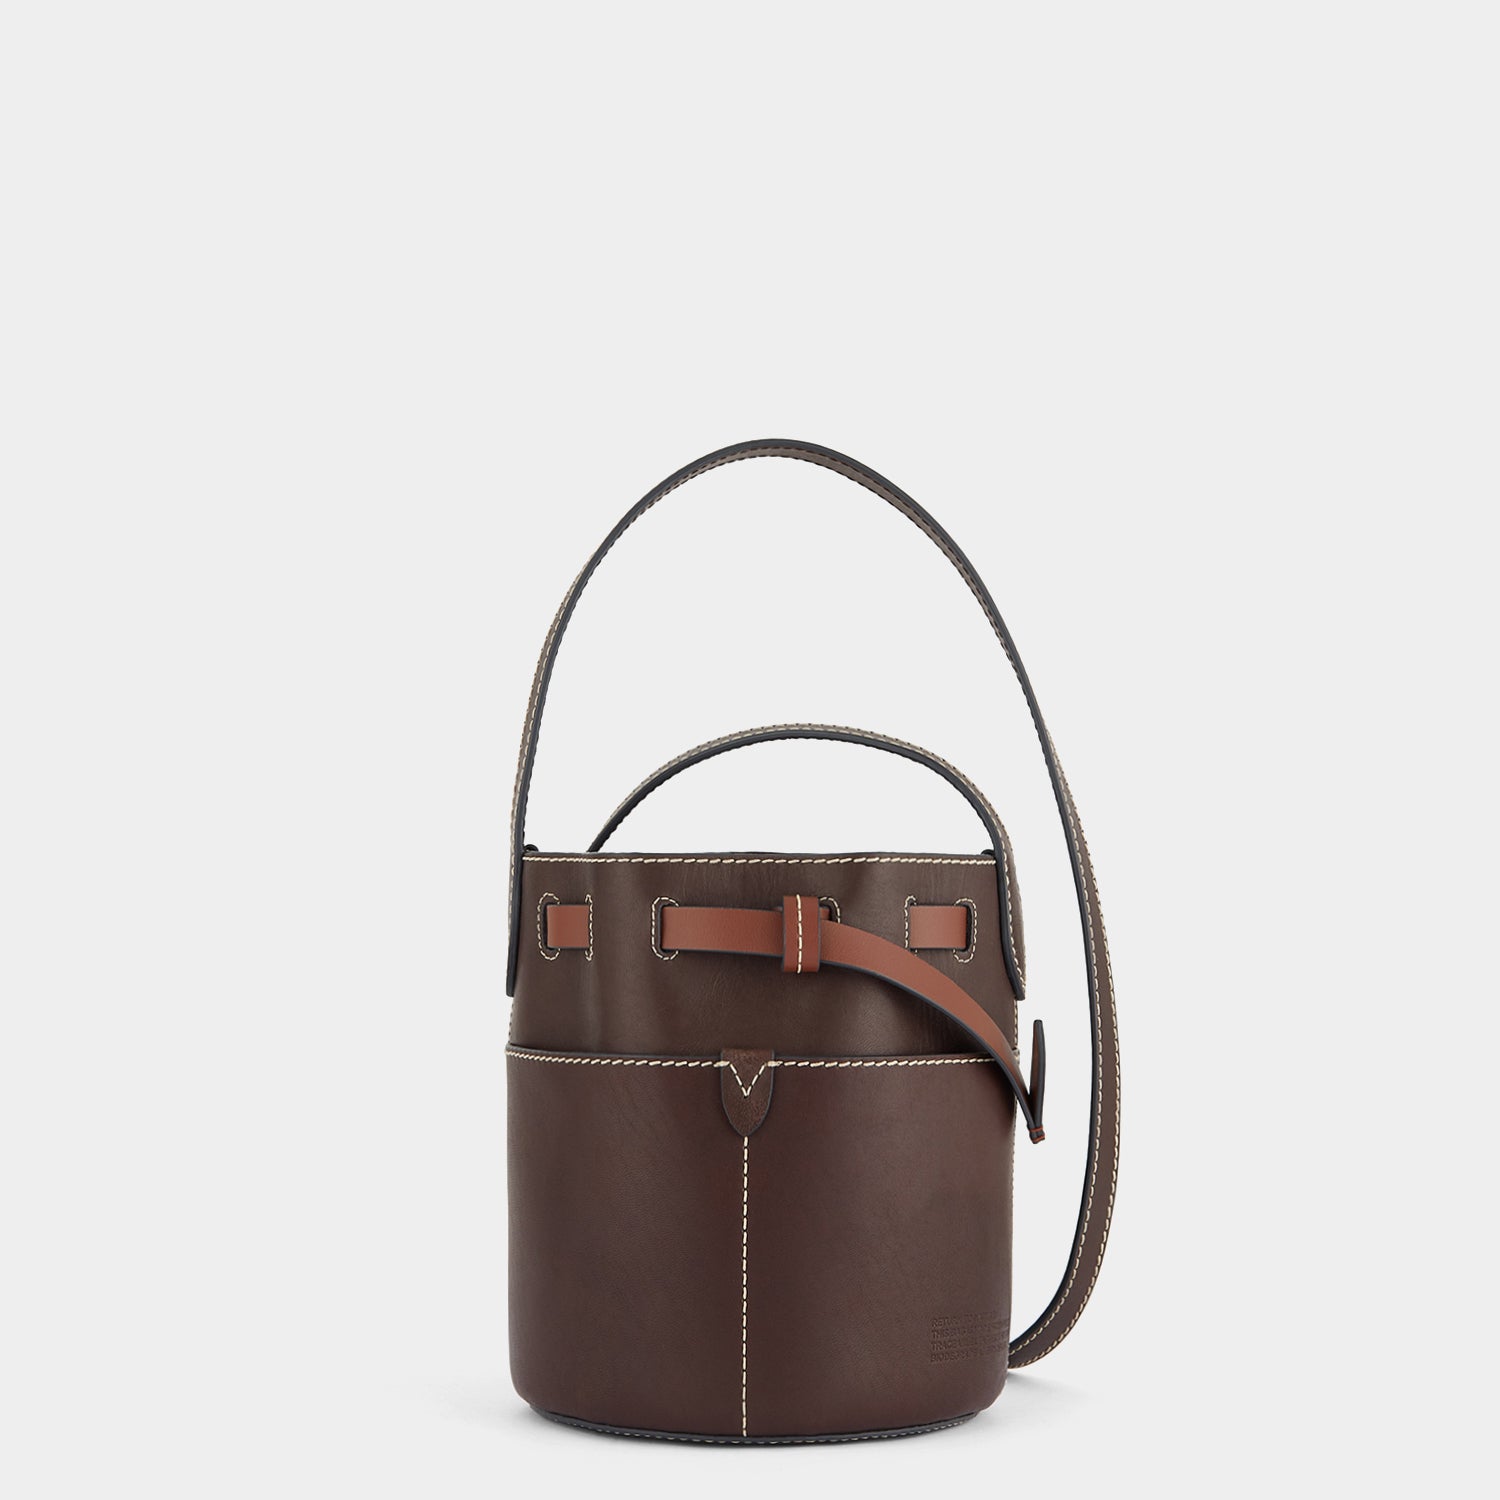 Return to Nature Mini Bucket Bag -

                  
                    Compostable Leather in Cigar -
                  

                  Anya Hindmarch US
